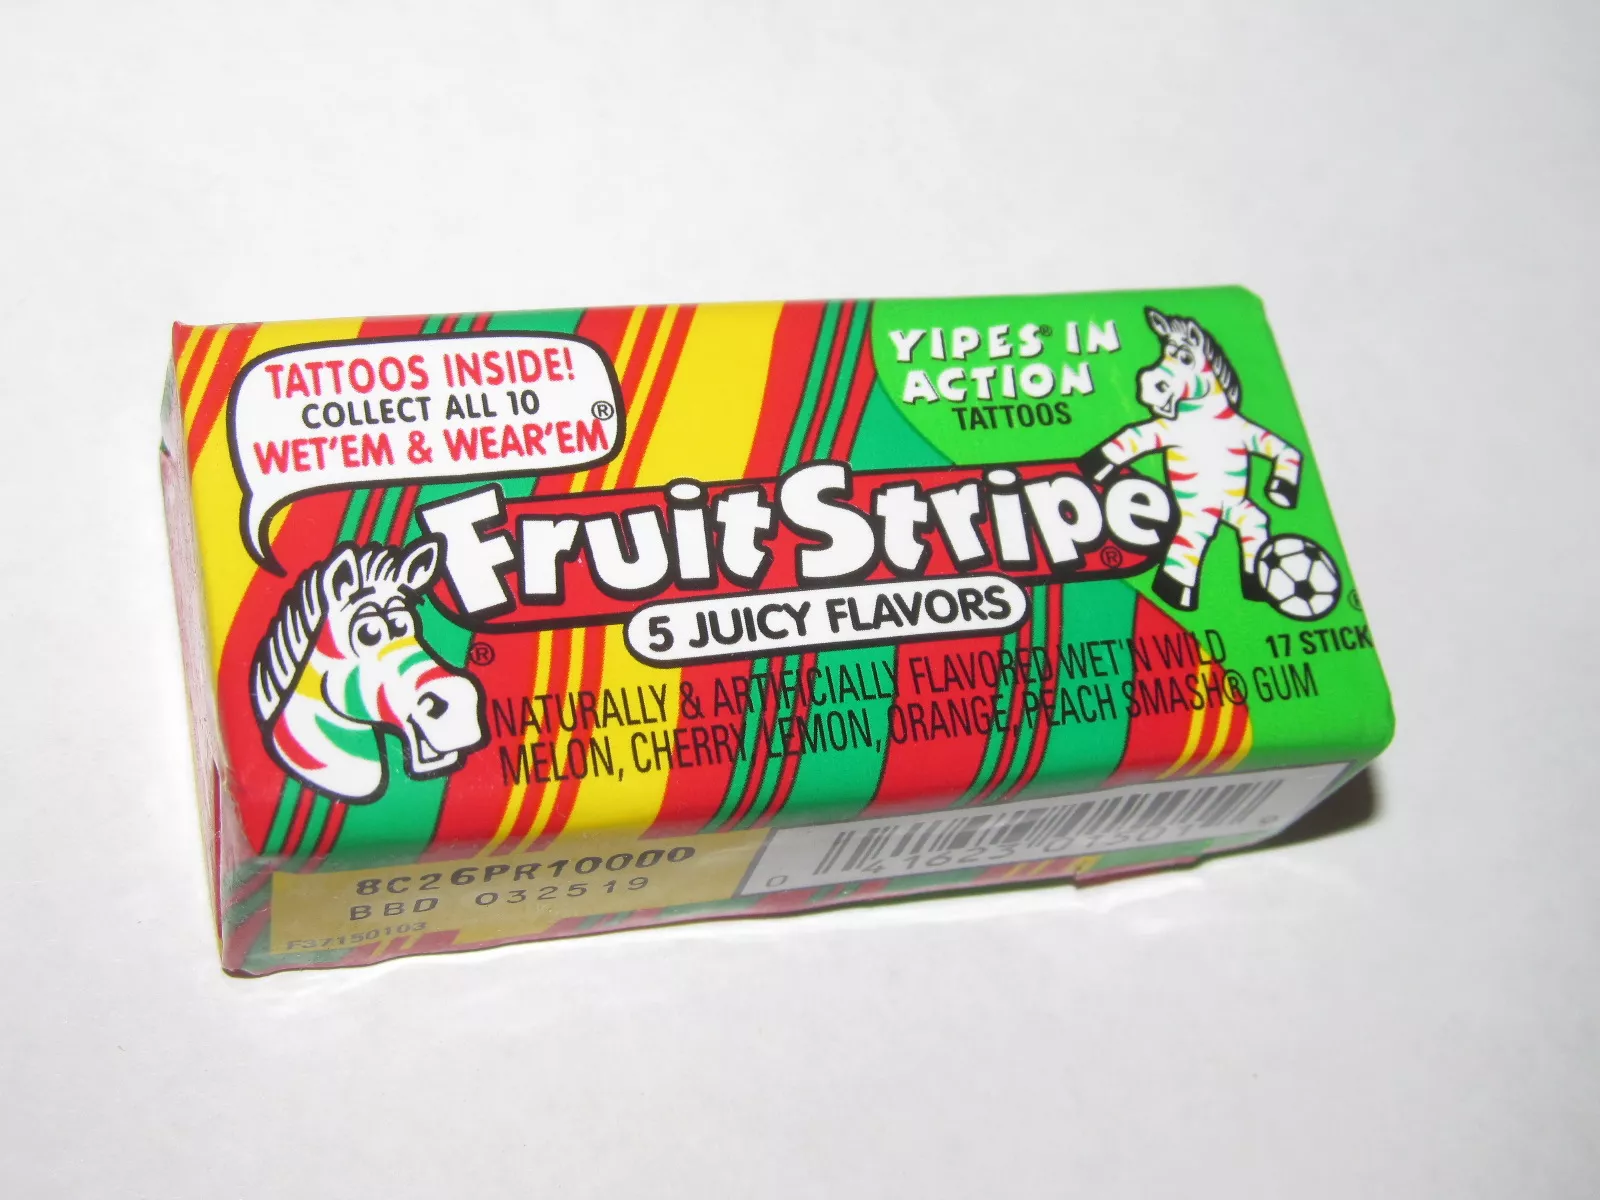 Package of Fruit Stripe Gum featuring Yipes the zebra